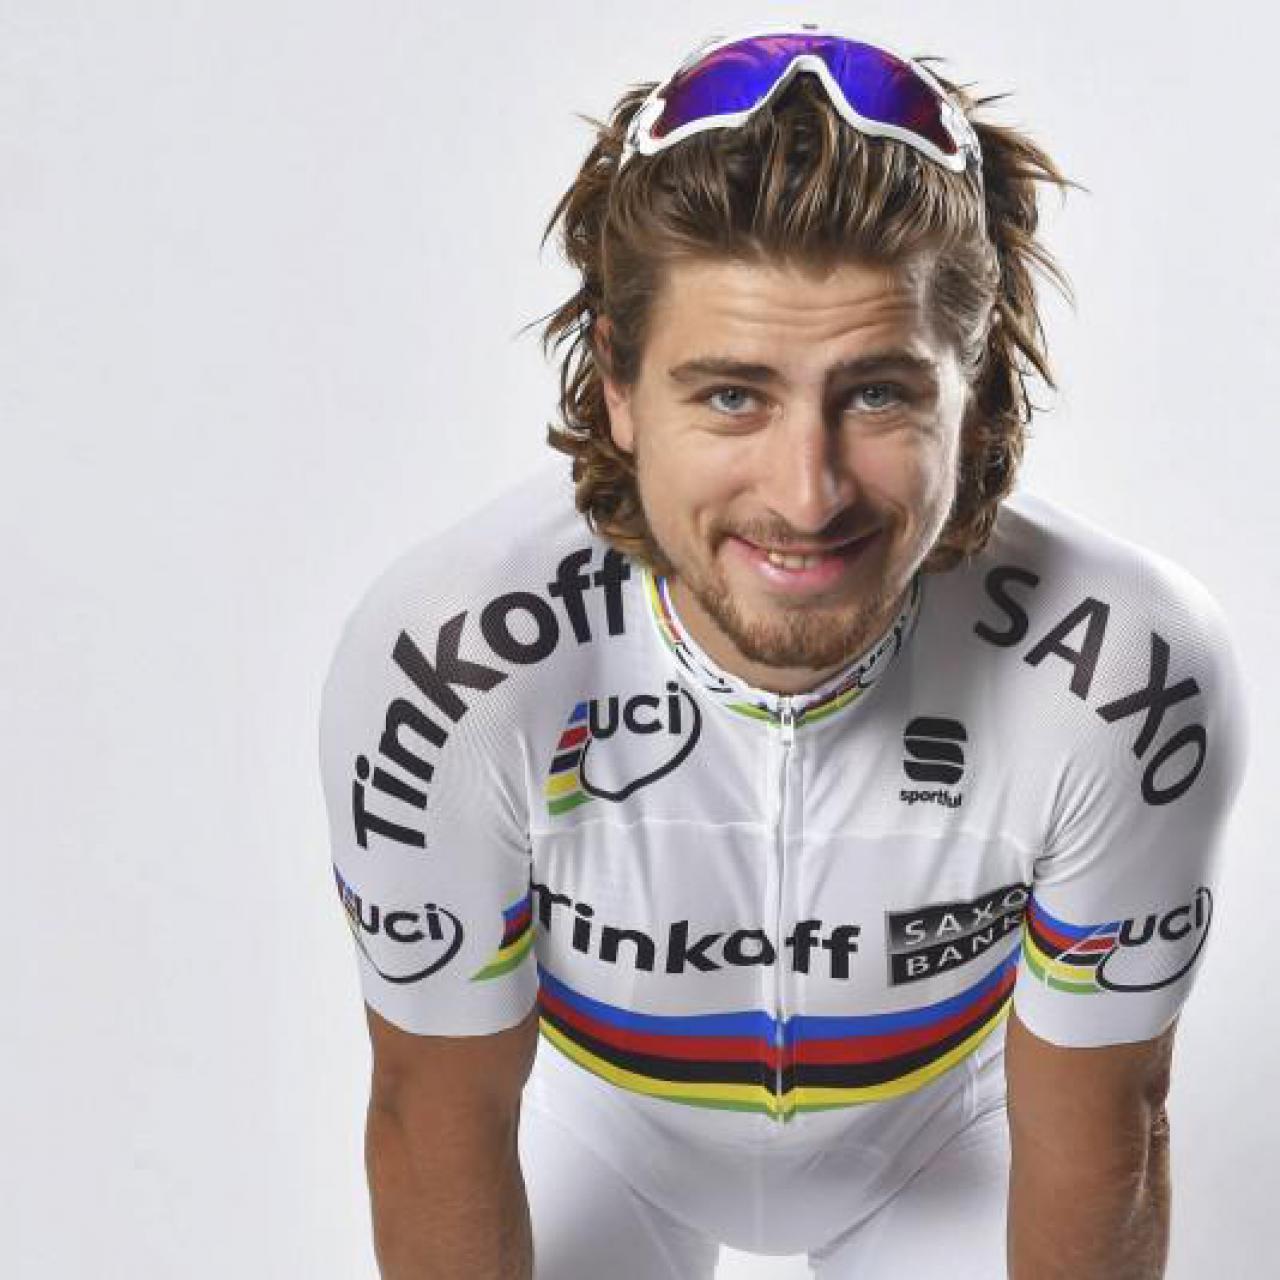 Peter Sagan on what it means to wear 